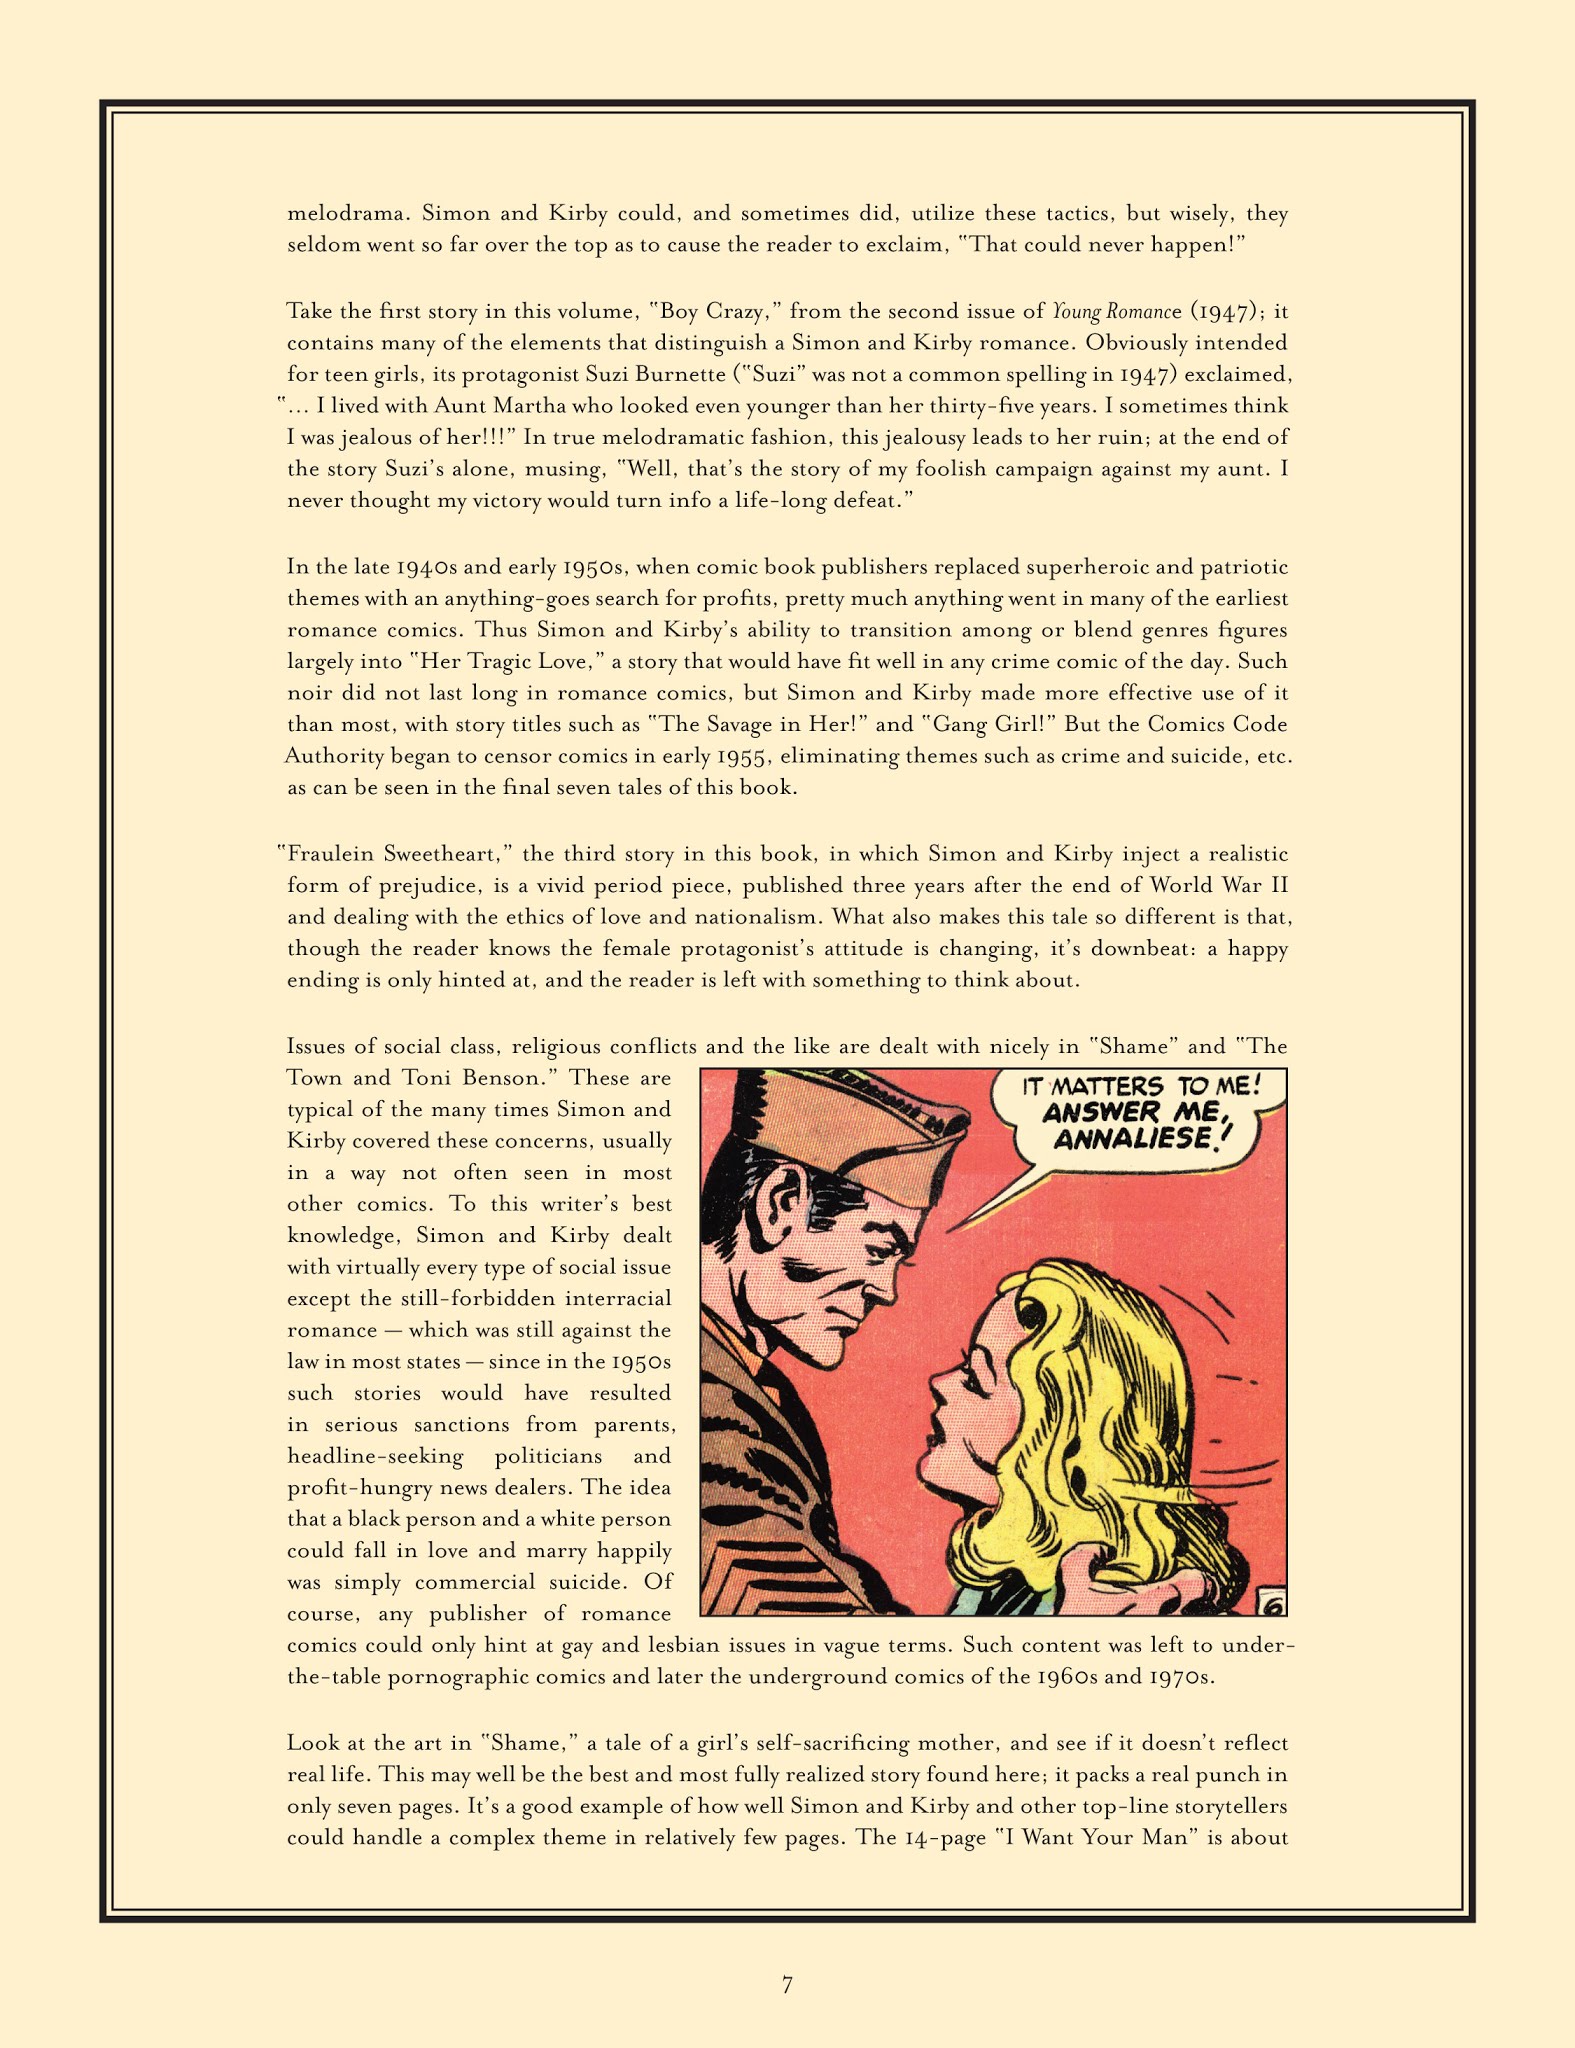 Read online Young Romance: The Best of Simon & Kirby’s Romance Comics comic -  Issue # TPB 2 - 8